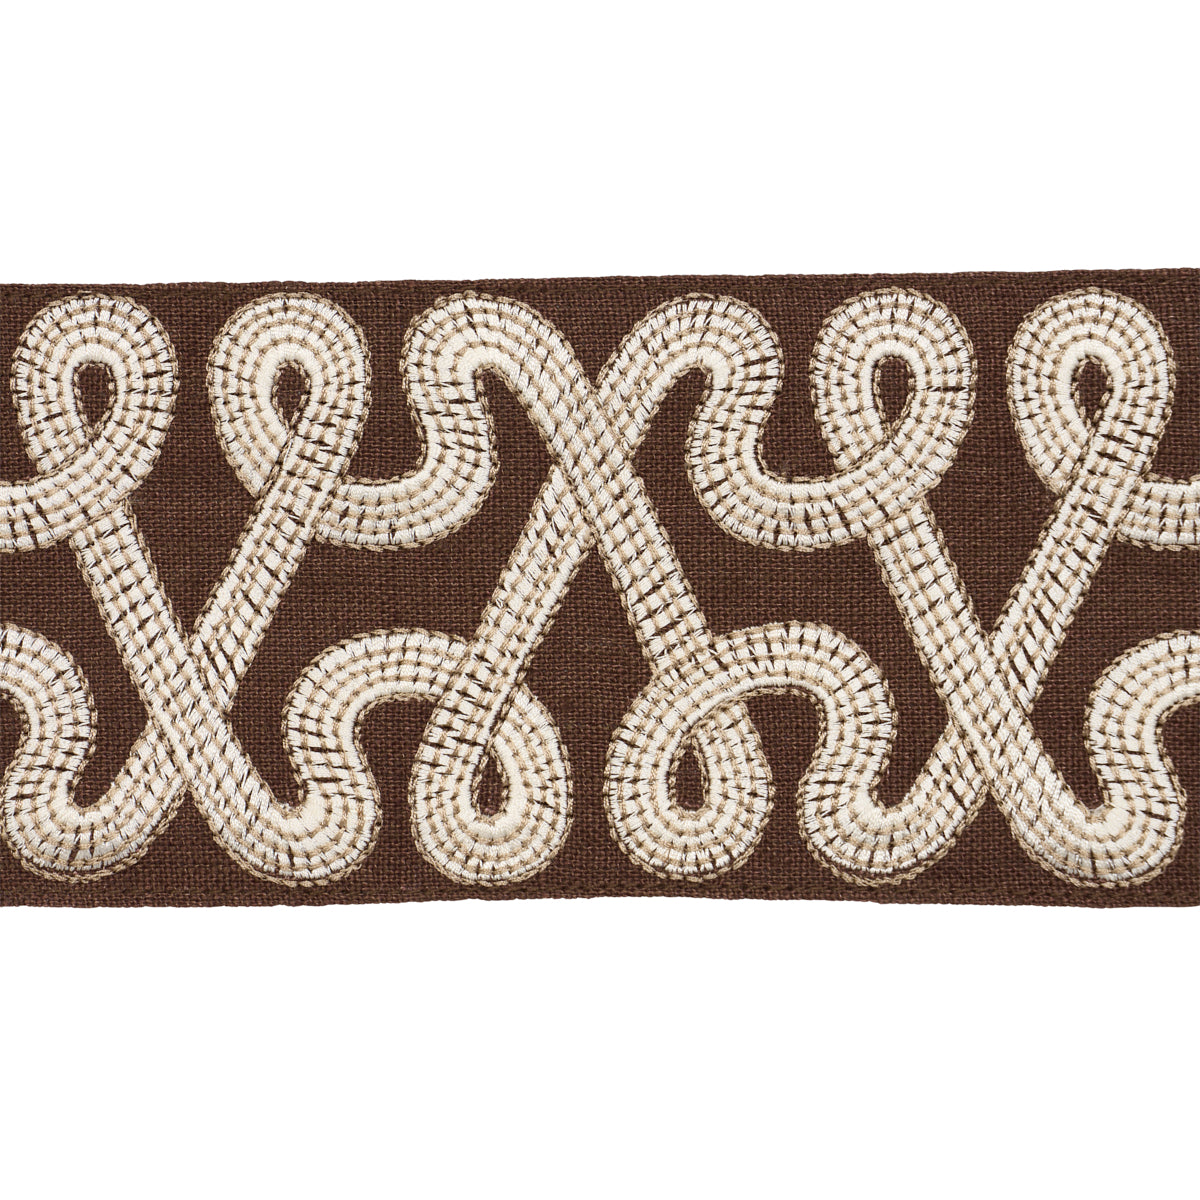 FREEFORM EMBROIDERED TAPE | CHOCOLATE